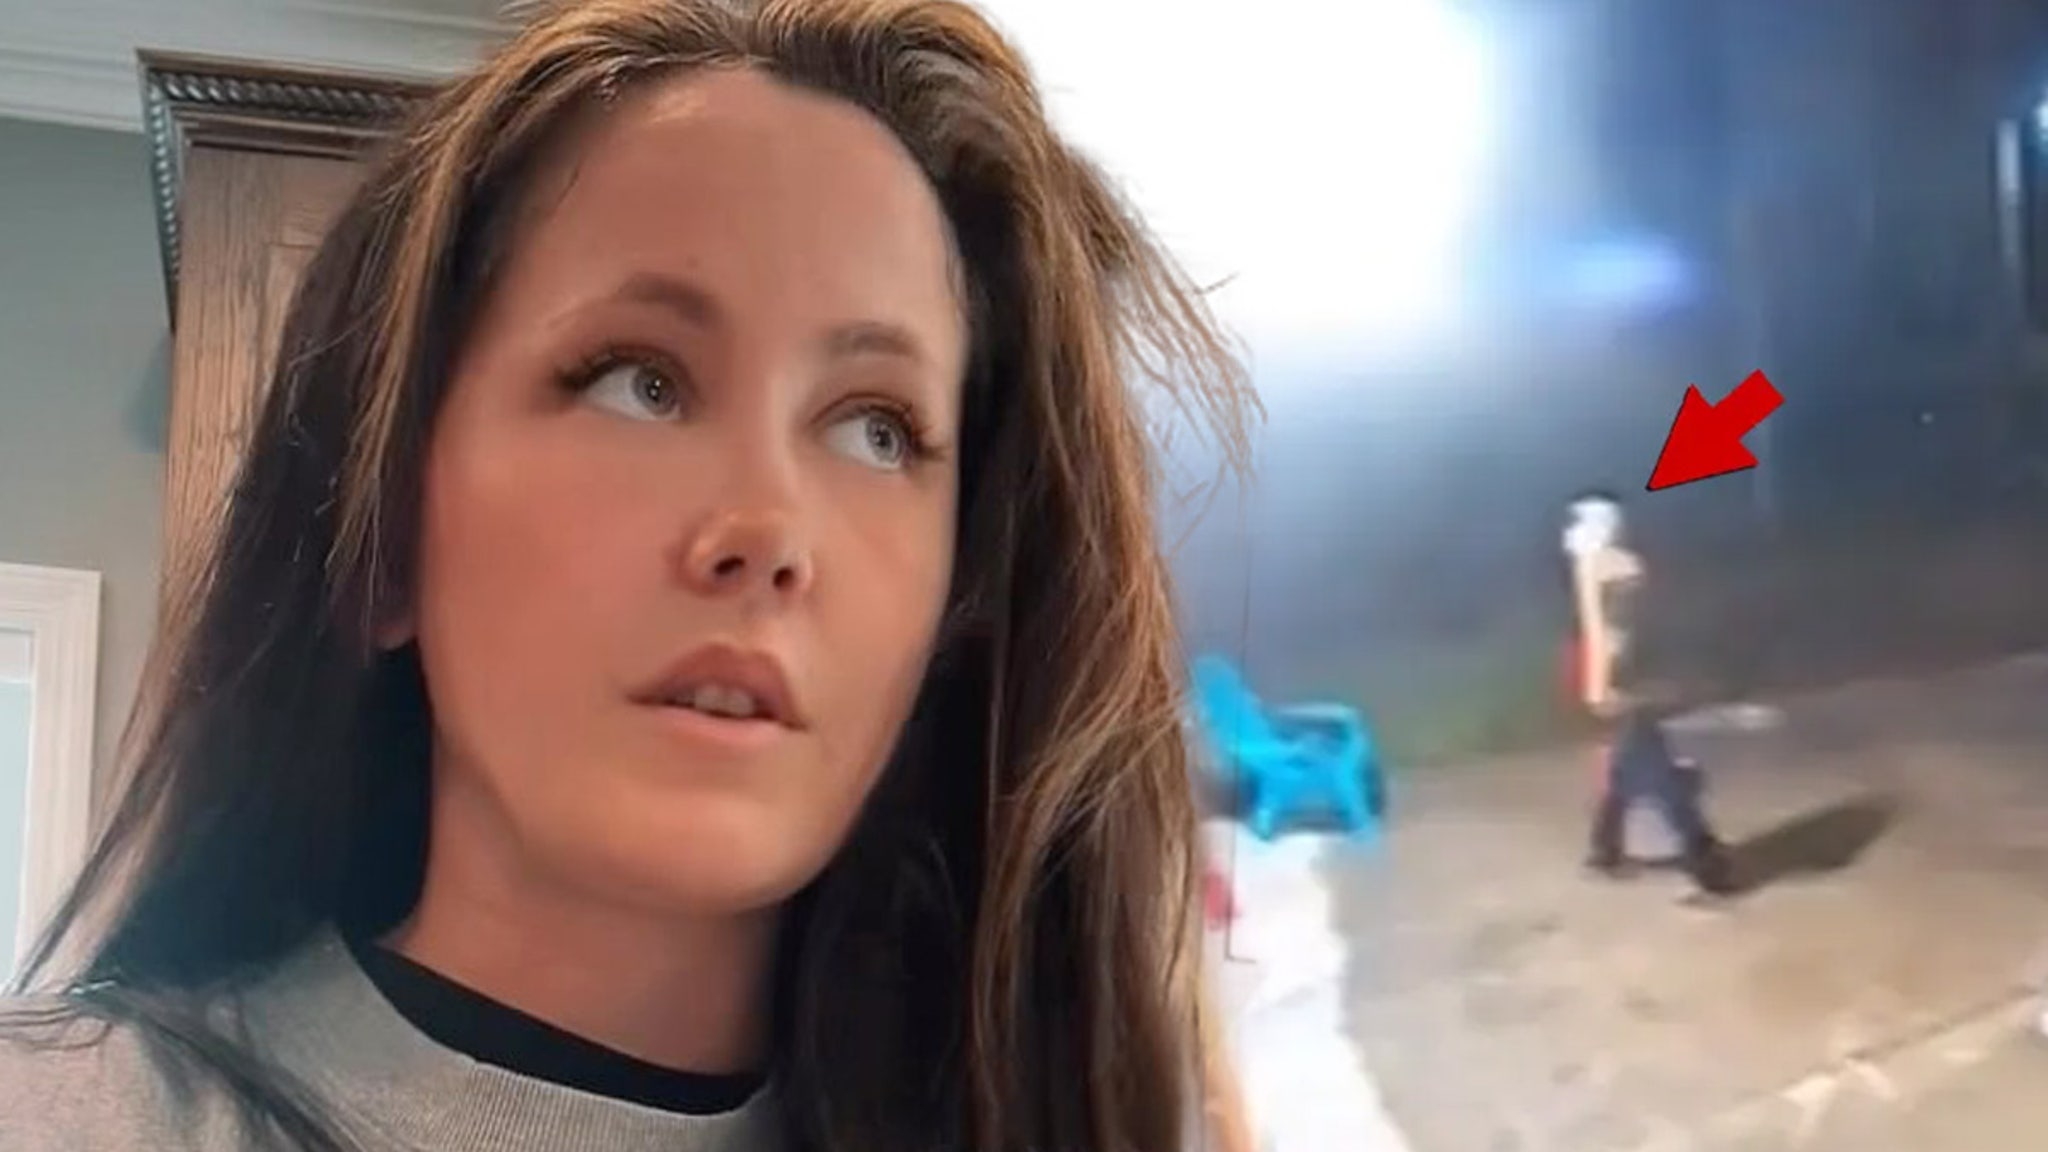 ‘Teen Mom’ Jenelle Evans Shares Footage From Scary Attempted Break-In